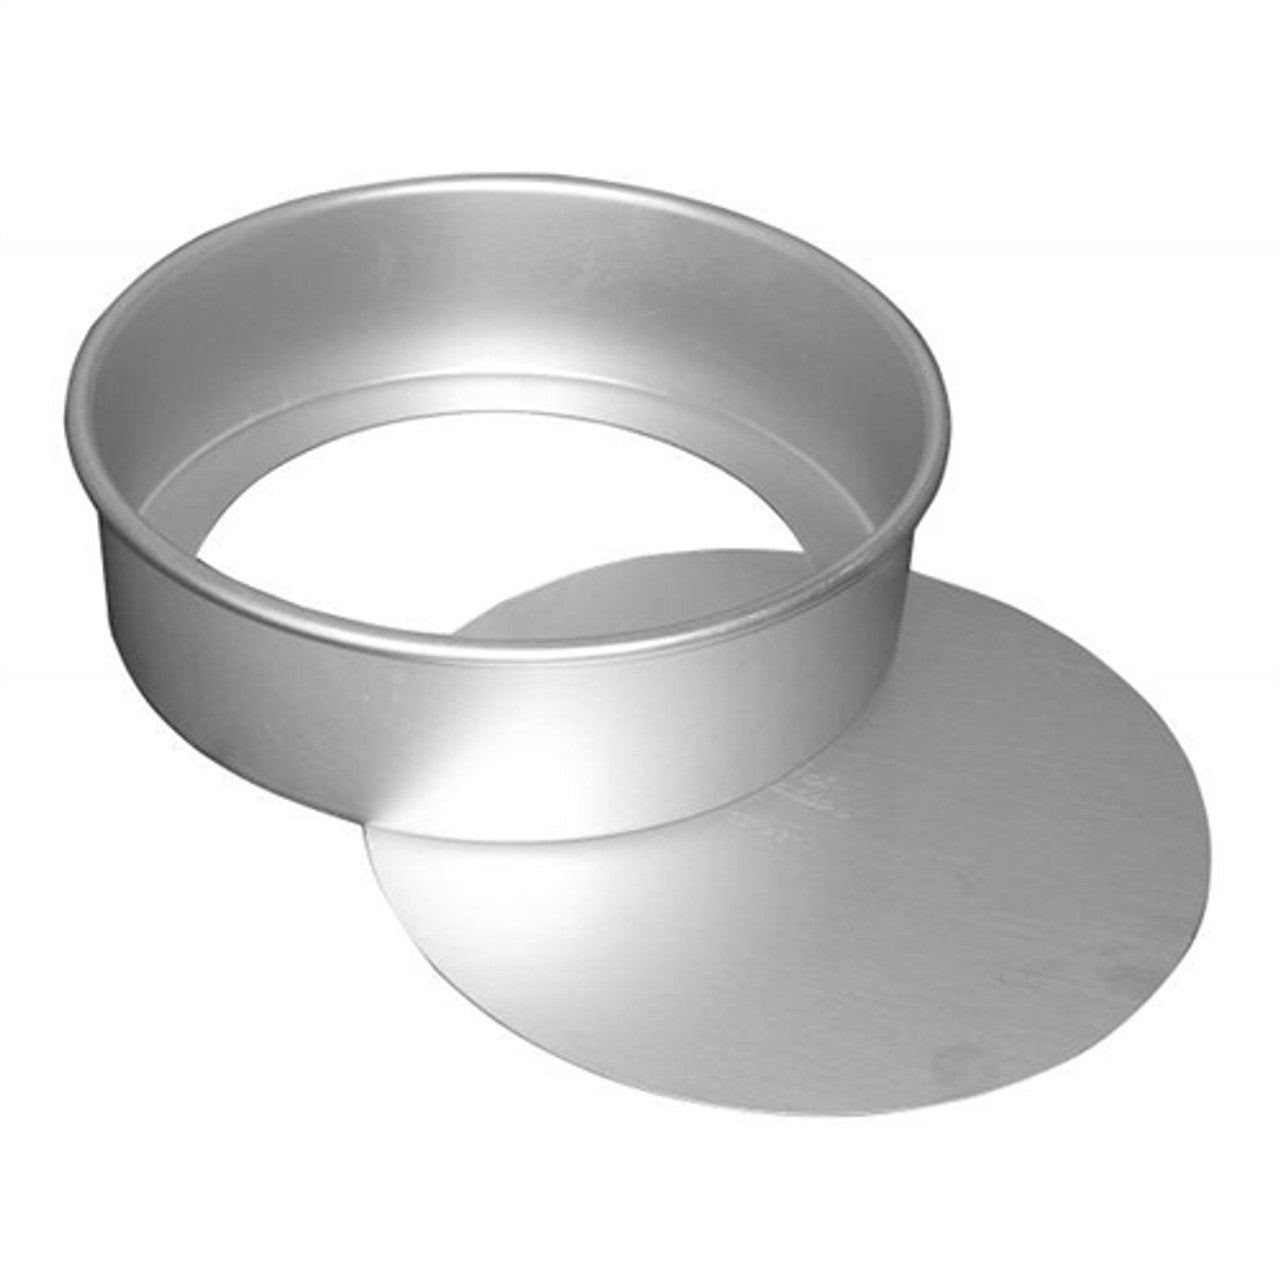 9" X 3" ROUND CHEESE CAKE PAN,  REMOVABLE BOTTOM